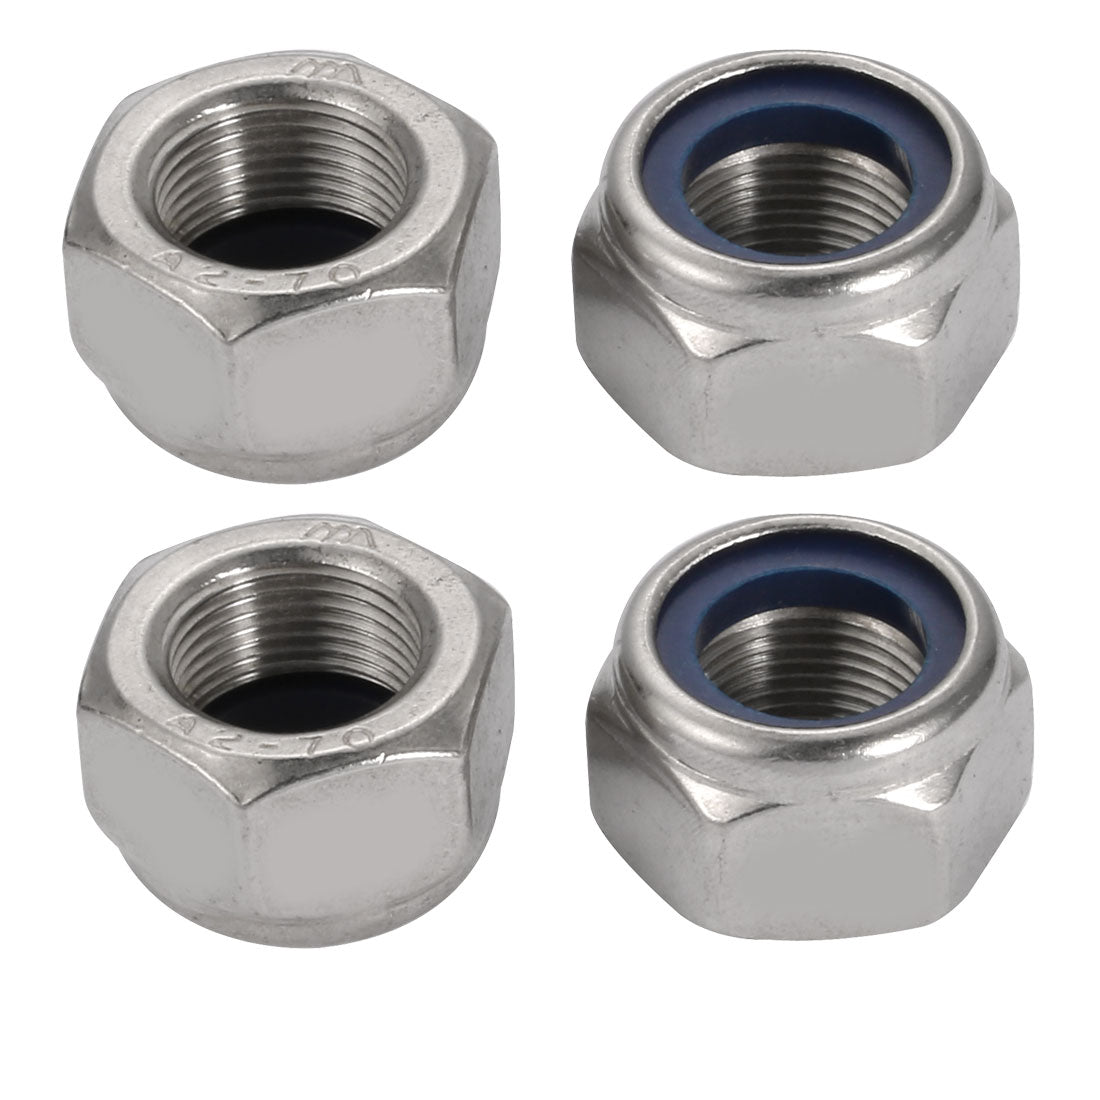 uxcell Uxcell 4pcs M20 x 1.5mm Pitch Metric Fine Thread 304 Stainless Steel Hex Lock Nuts